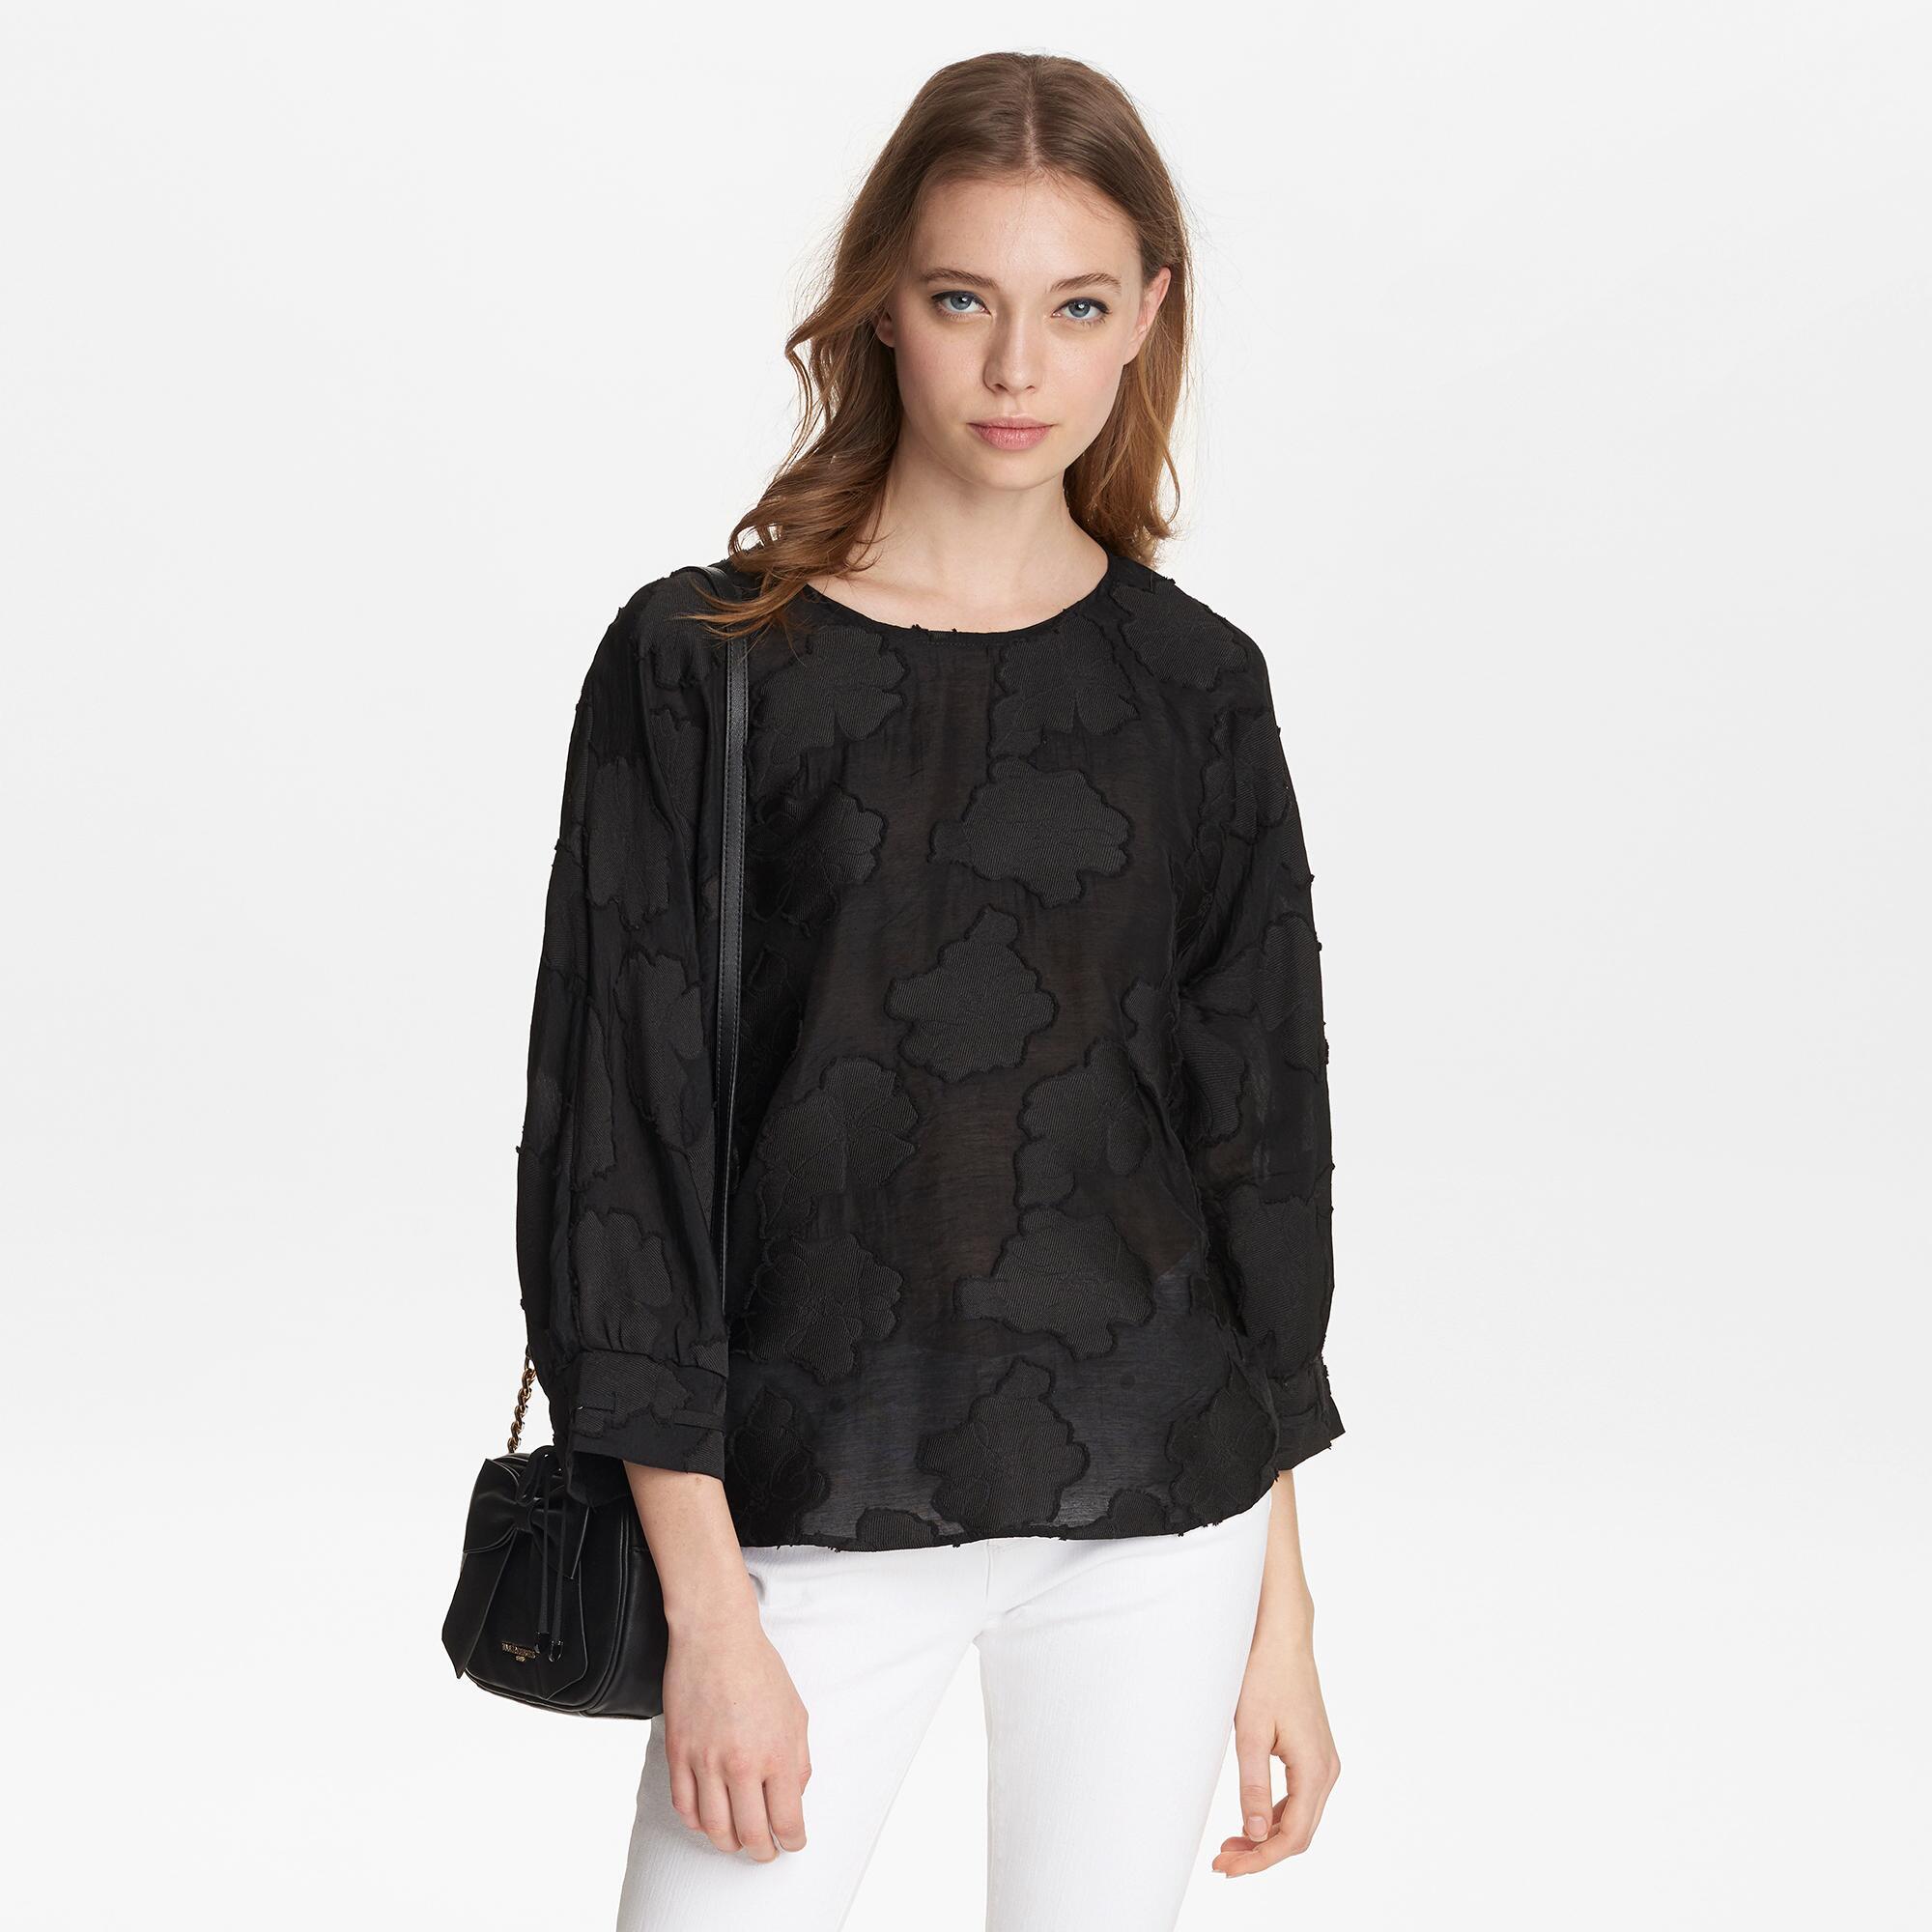 Karl Lagerfeld Lace Floral Burnout Blouse in Black - Lyst